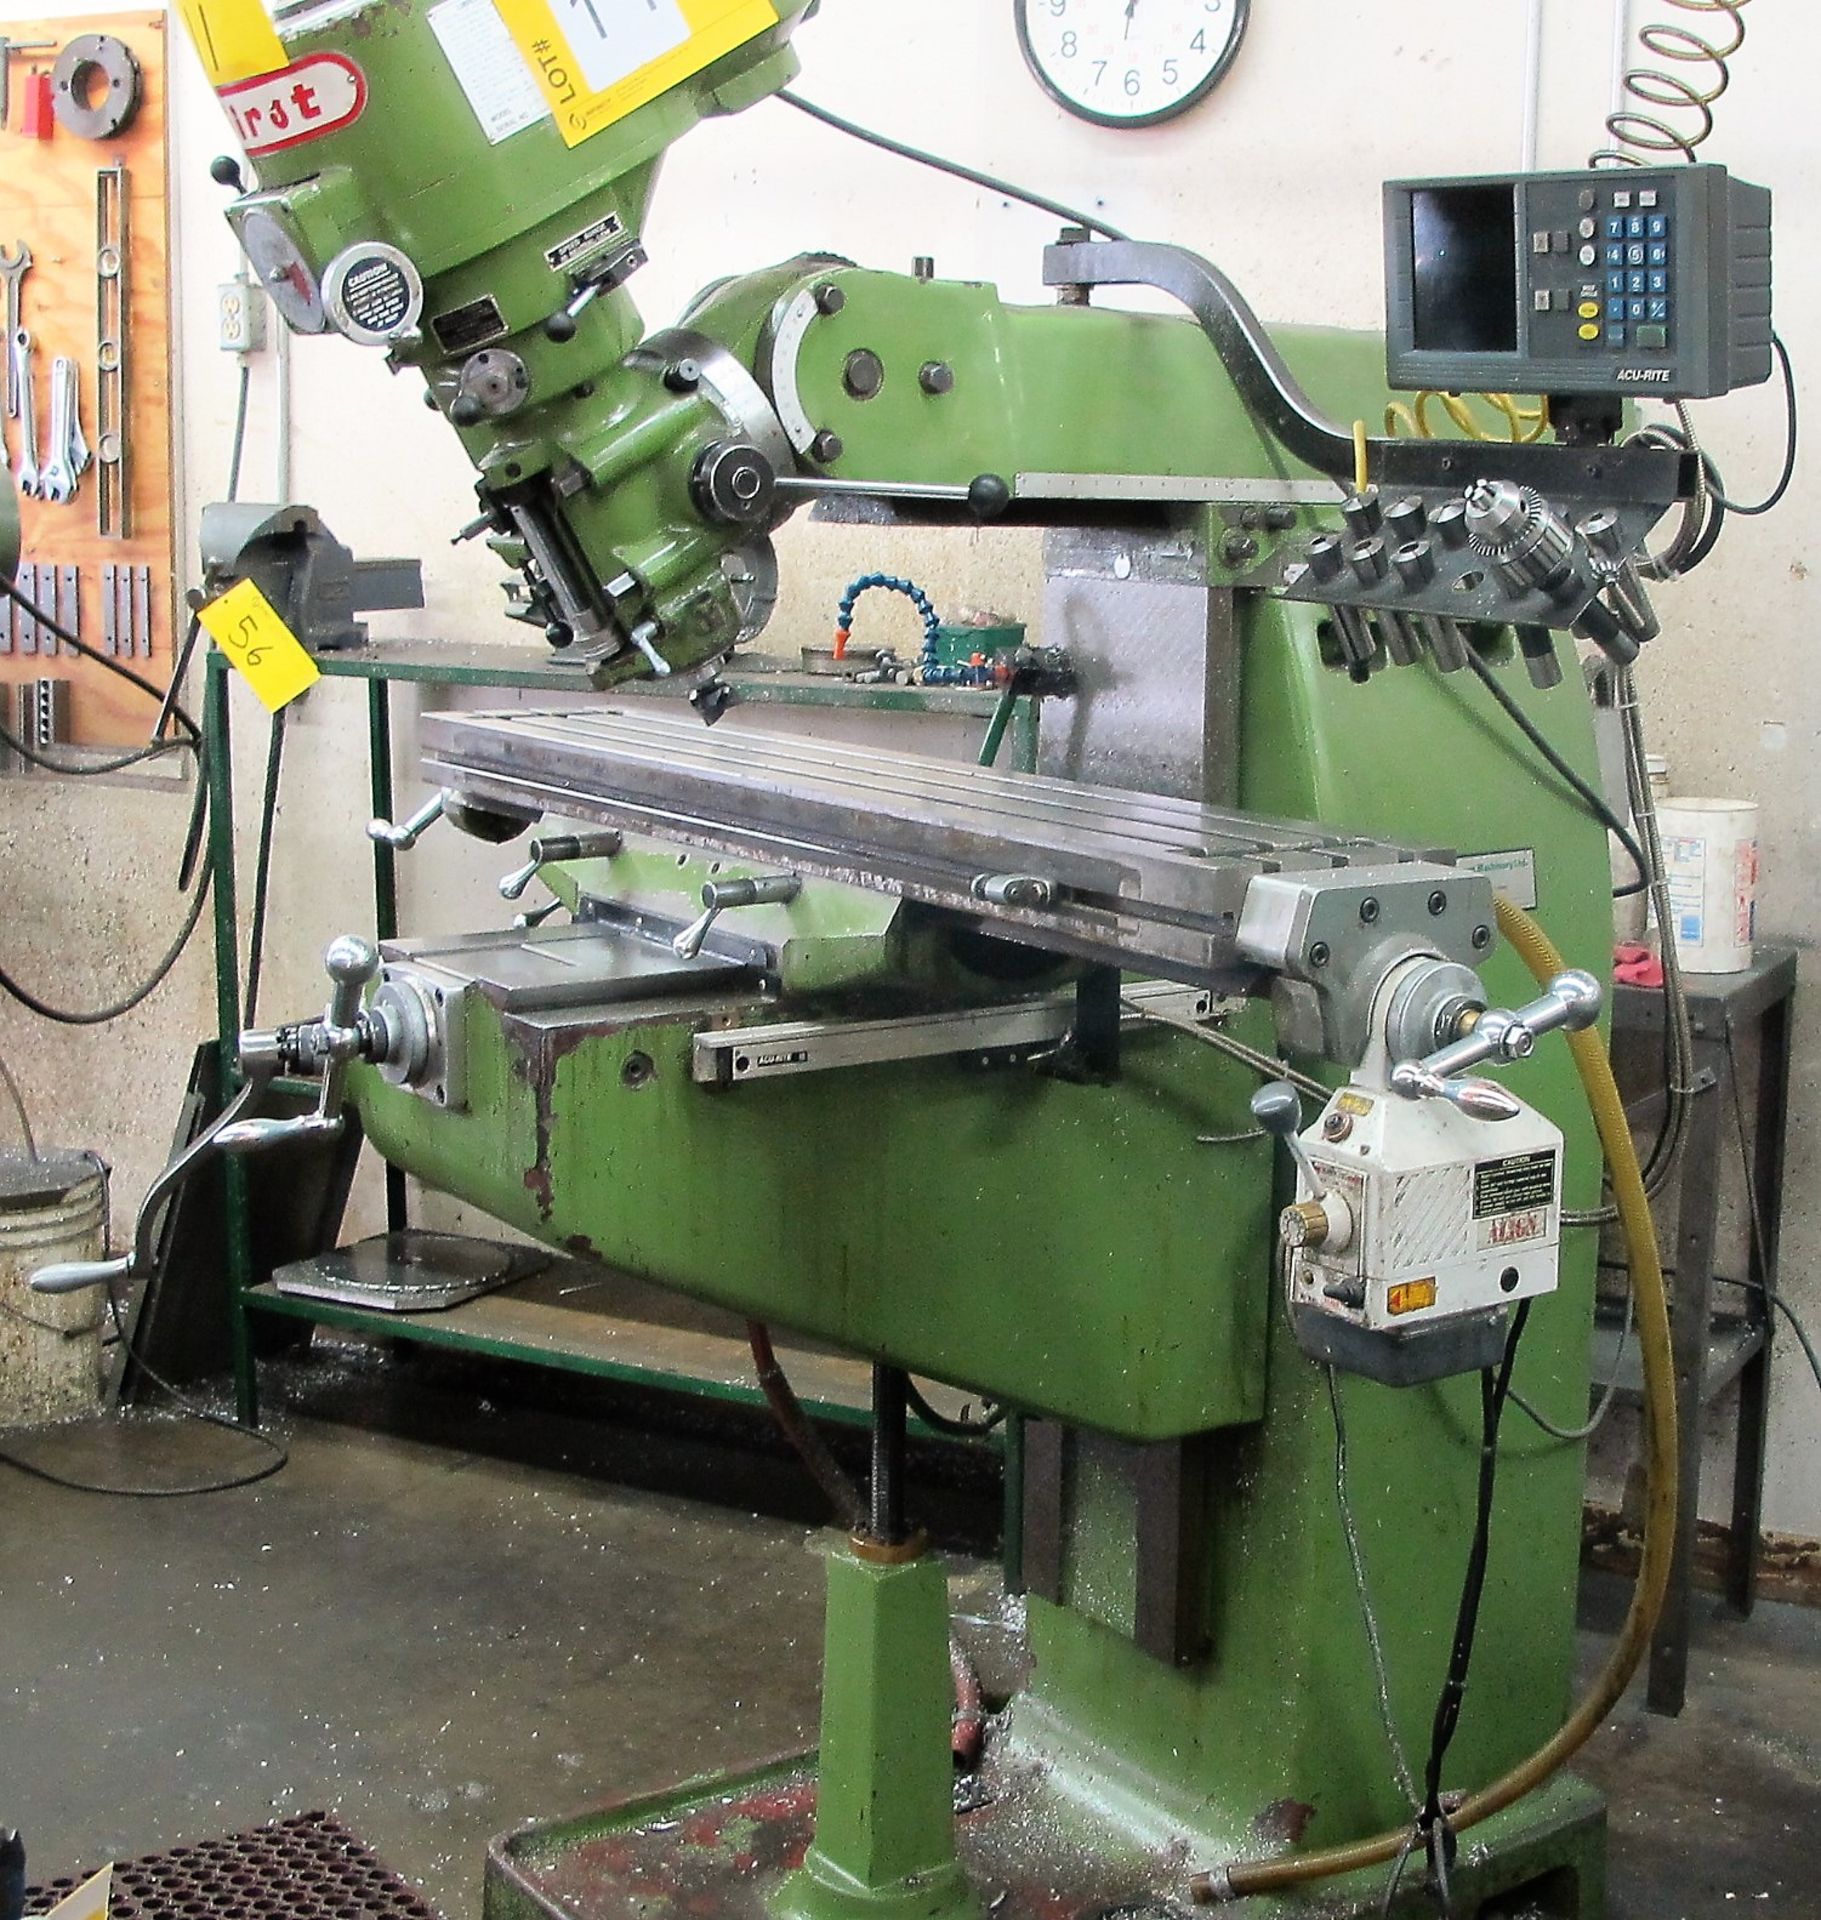 FIRST MILLING MACHINE LC-18VA VERTICAL MILLING MACHINE, ACU-RITE 2 AXIS DRO, 9" X 49" TABLE, ALIGN - Image 2 of 3